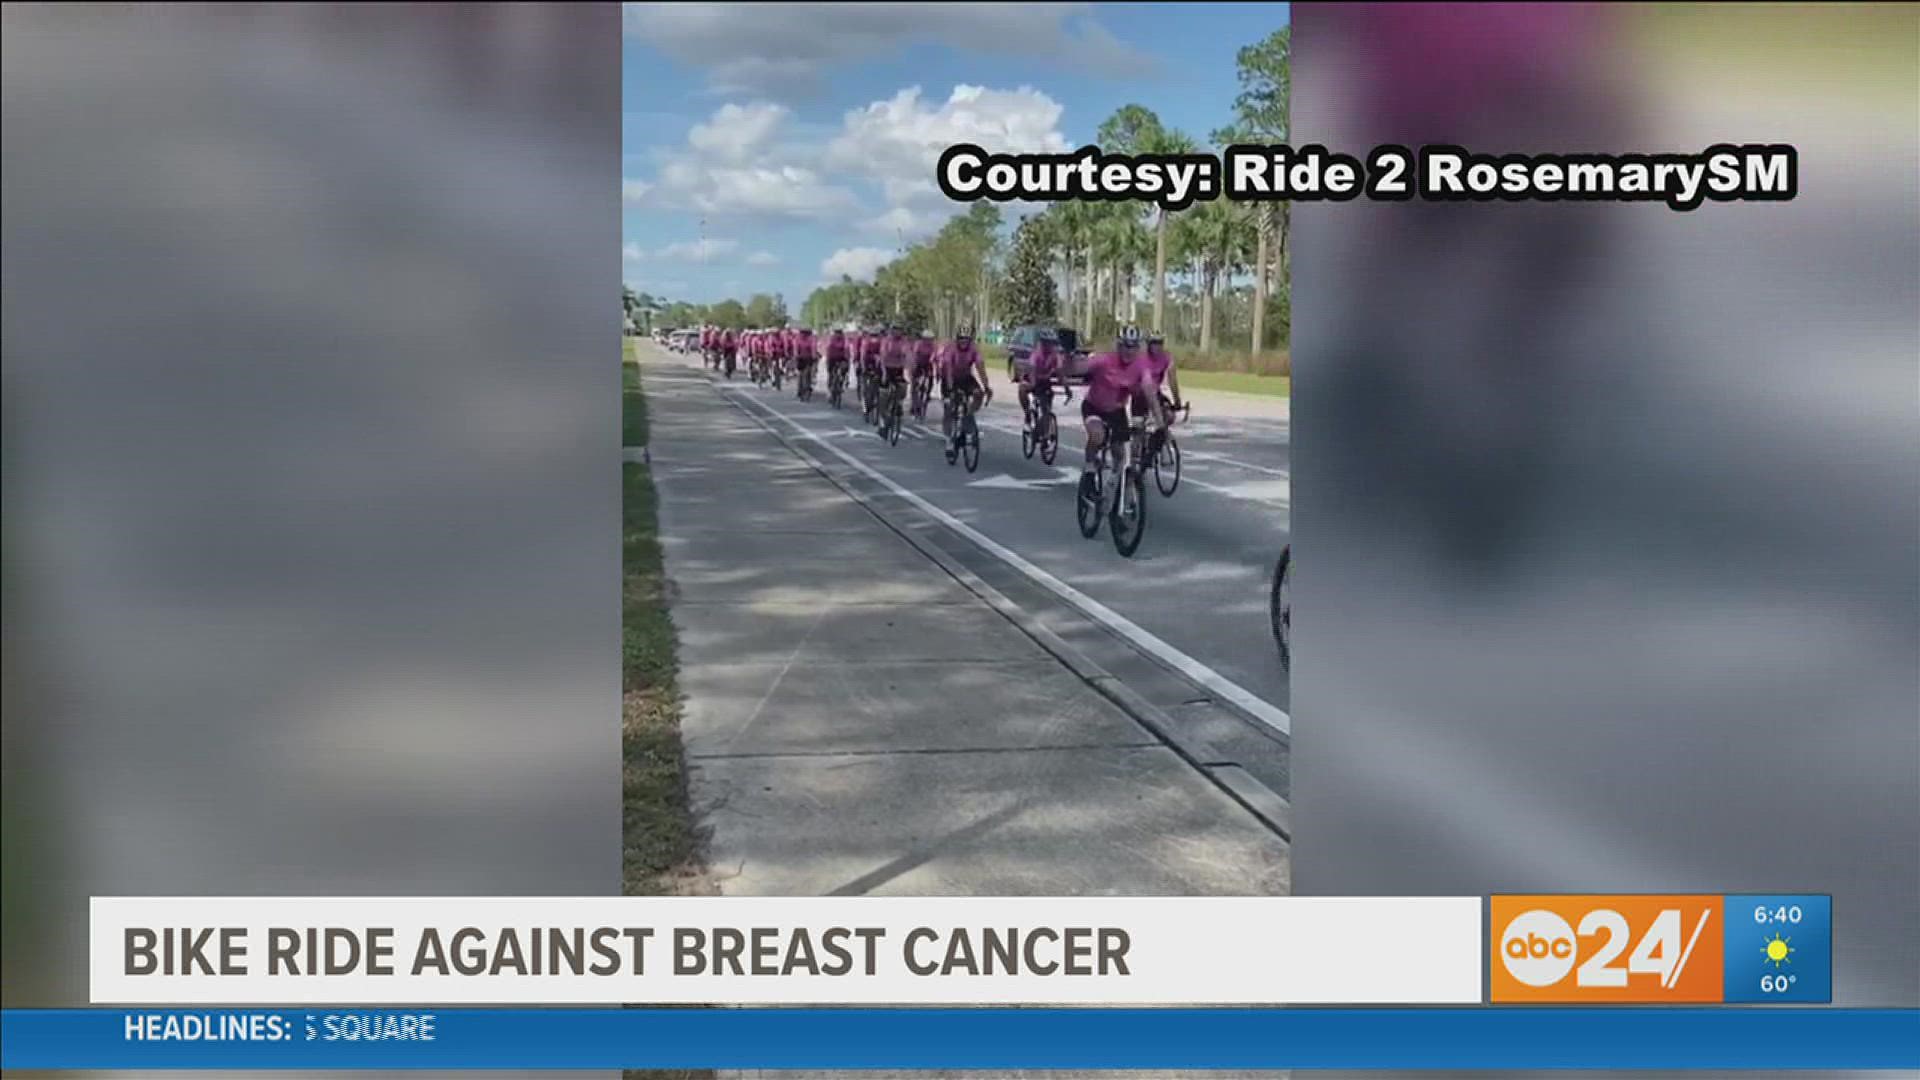 This charitable cycling event started in 2011 with just nine riders and now, 12 years later, the group has raised $1.6 million and continues to grow each year.